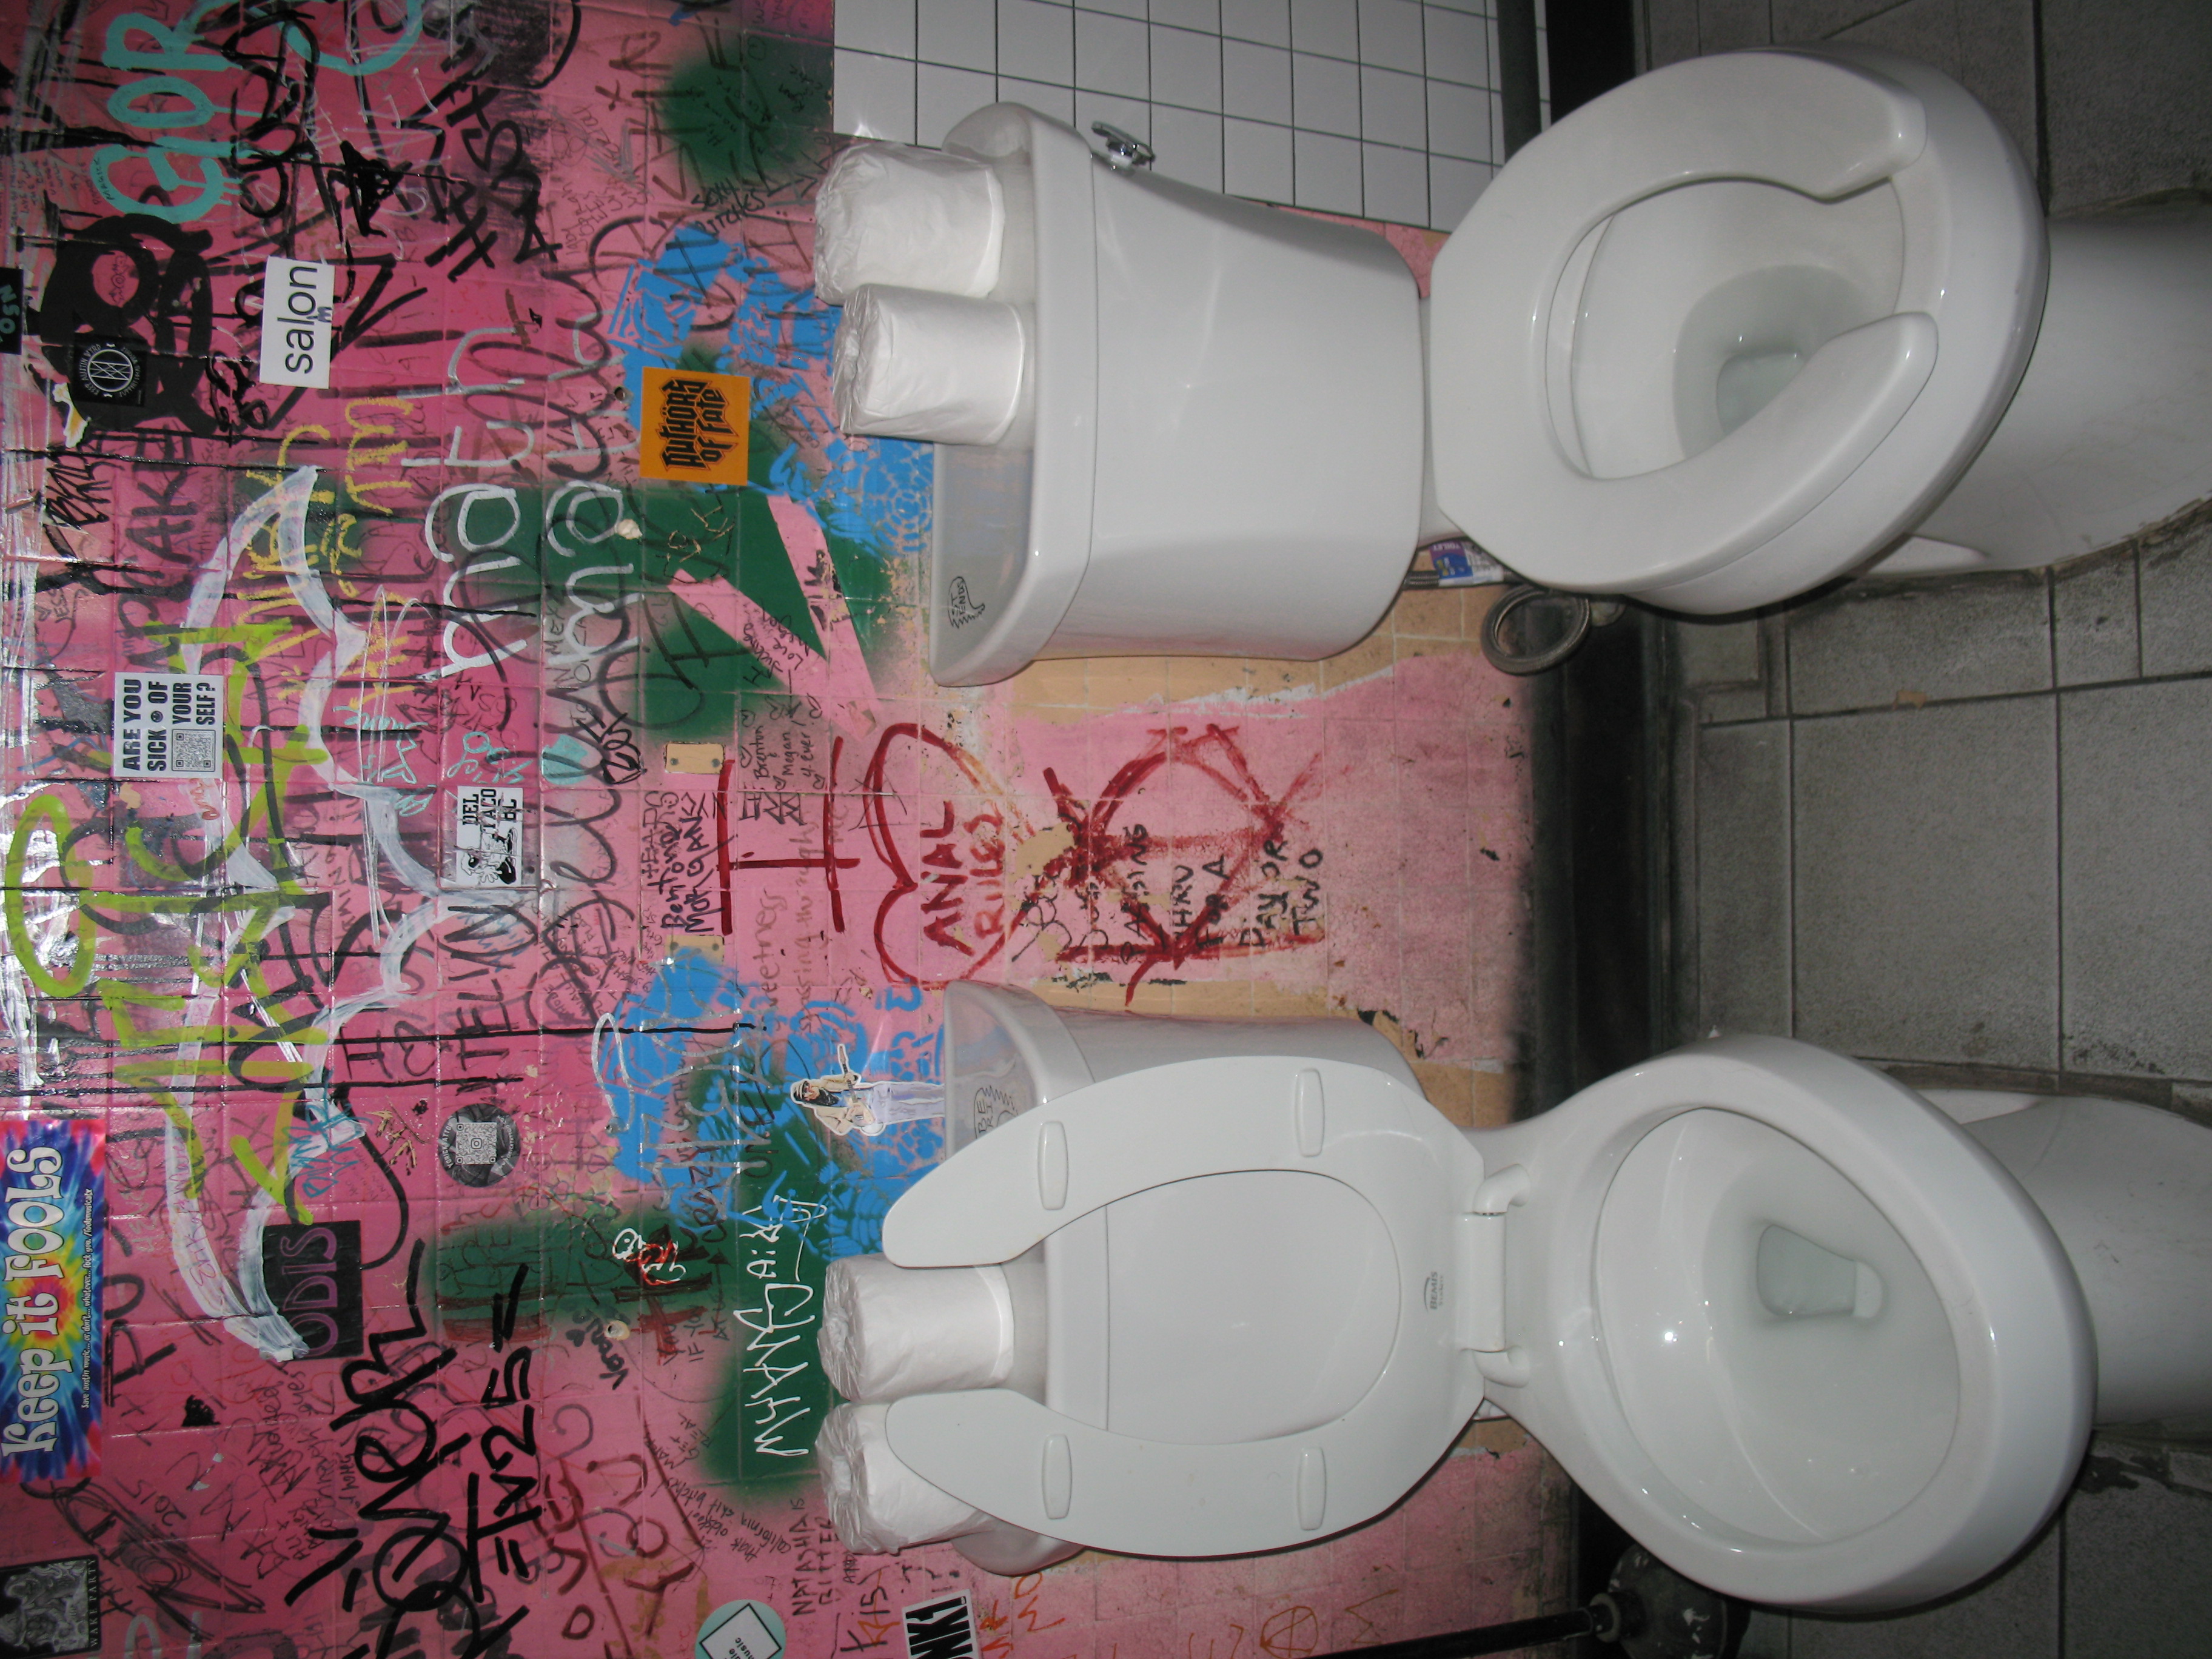 Just some toilets